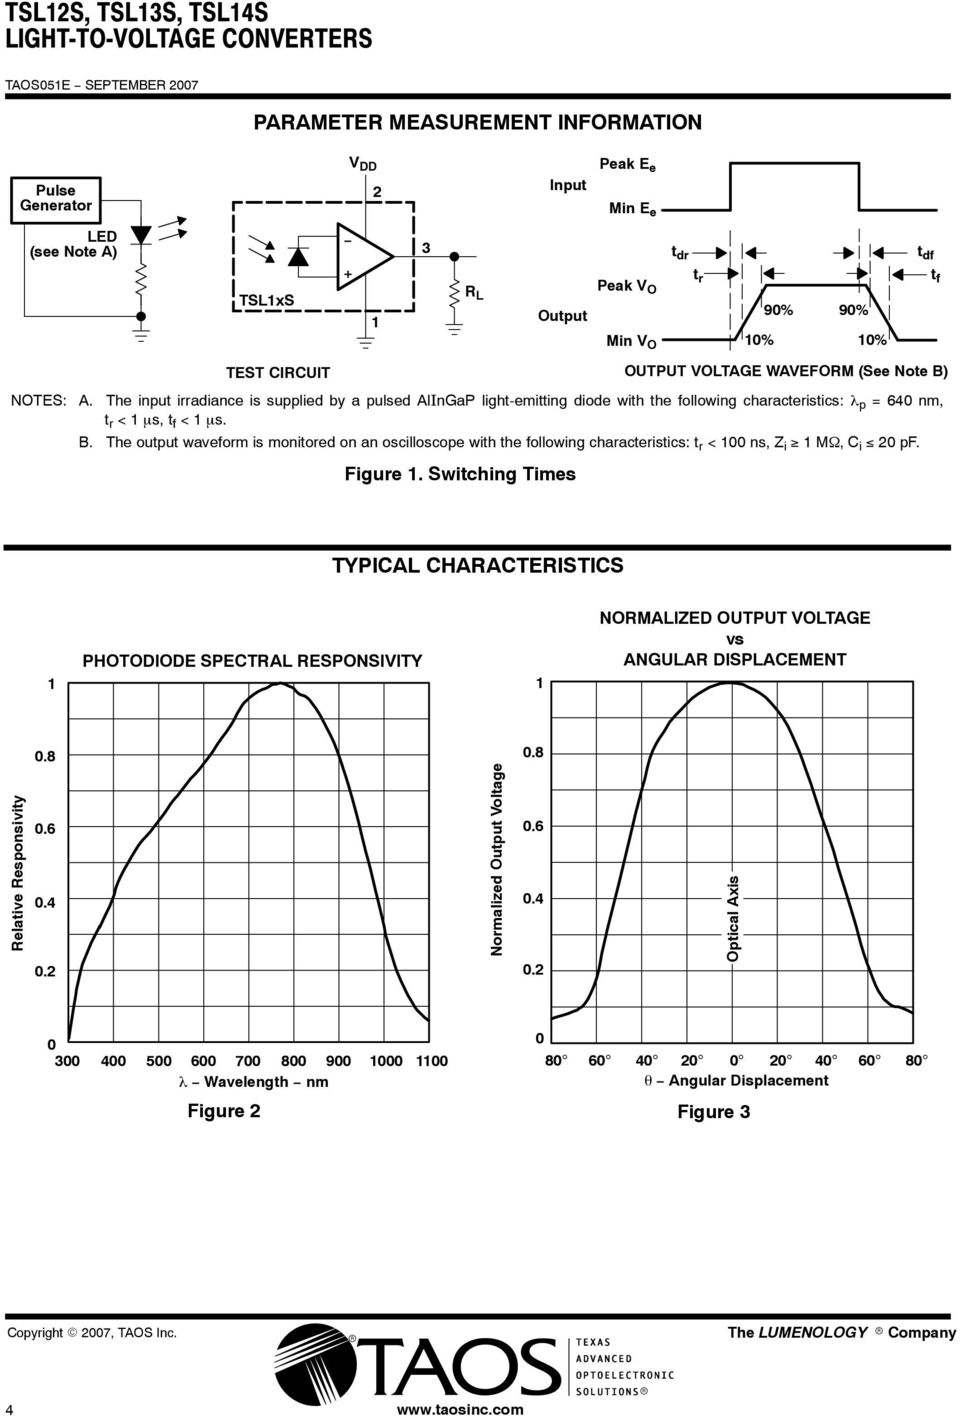 Figure. Switching Times TYPICAL CHARACTERISTICS PHOTODIODE SPECTRAL RESPONSIVITY NORMALIZED OUTPUT VOLTAGE vs ANGULAR DISPLACEMENT.8.8 Relative Responsivity.6.